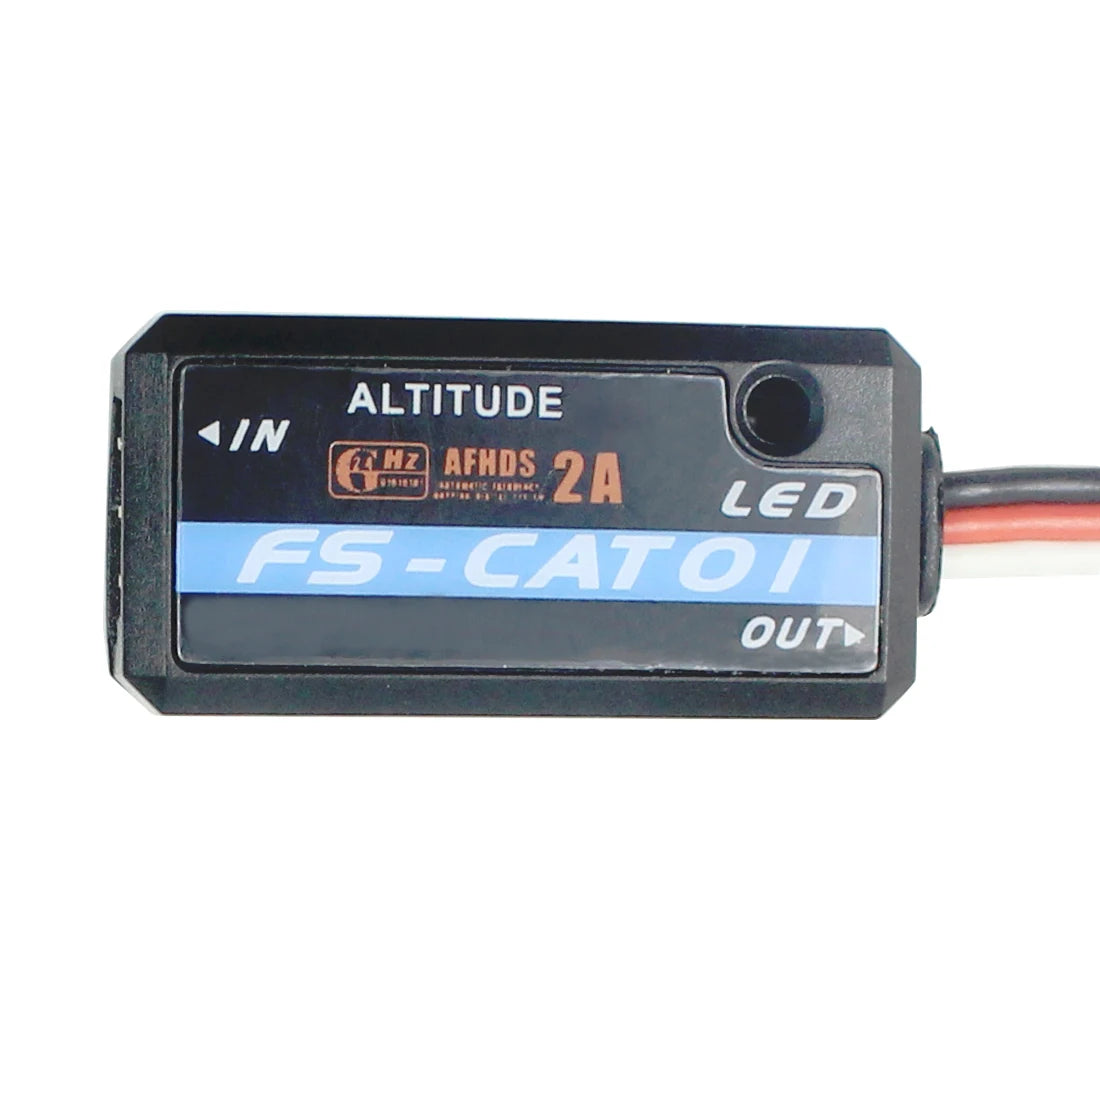 ALTITUDE 4in H2 AFHDS 2A LED ASACATOT